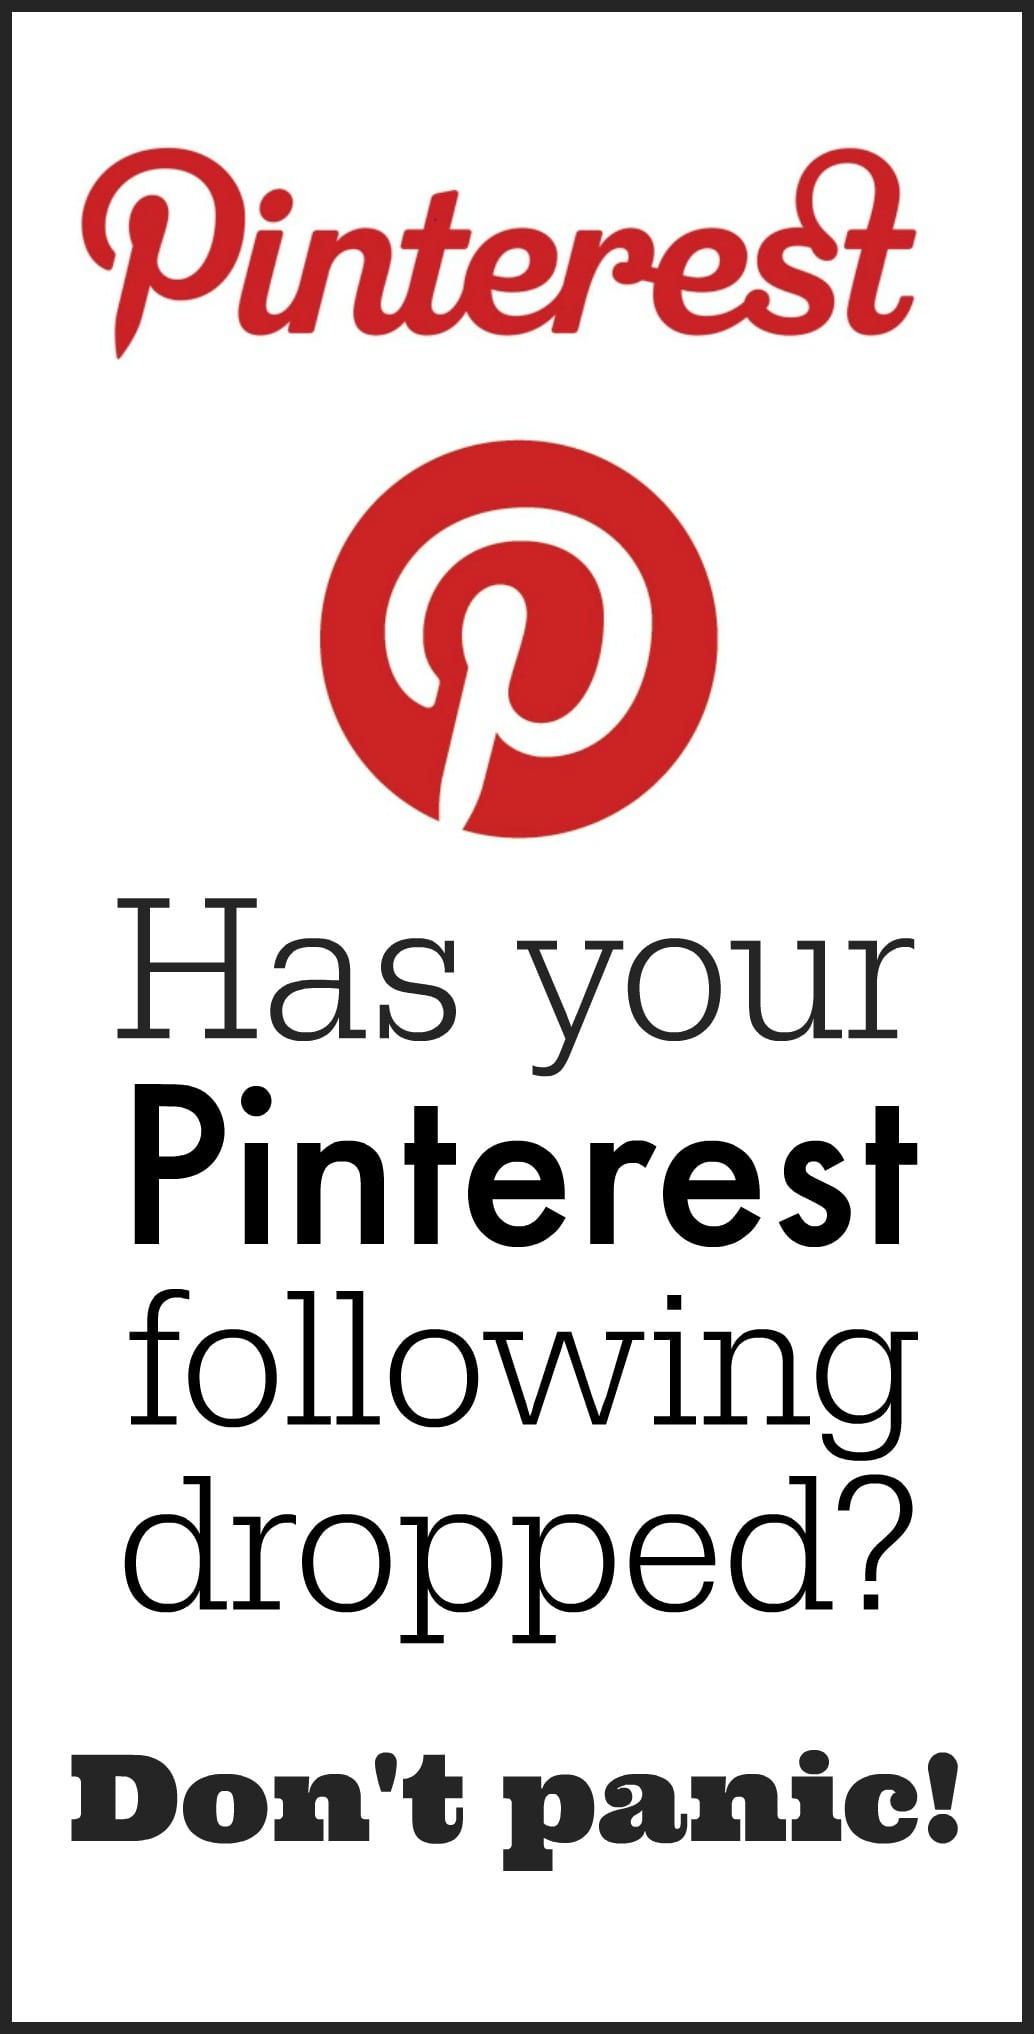 Has your Pinterest following dropped? You're not alone. Don't panic. Read more at MiloTree.com.